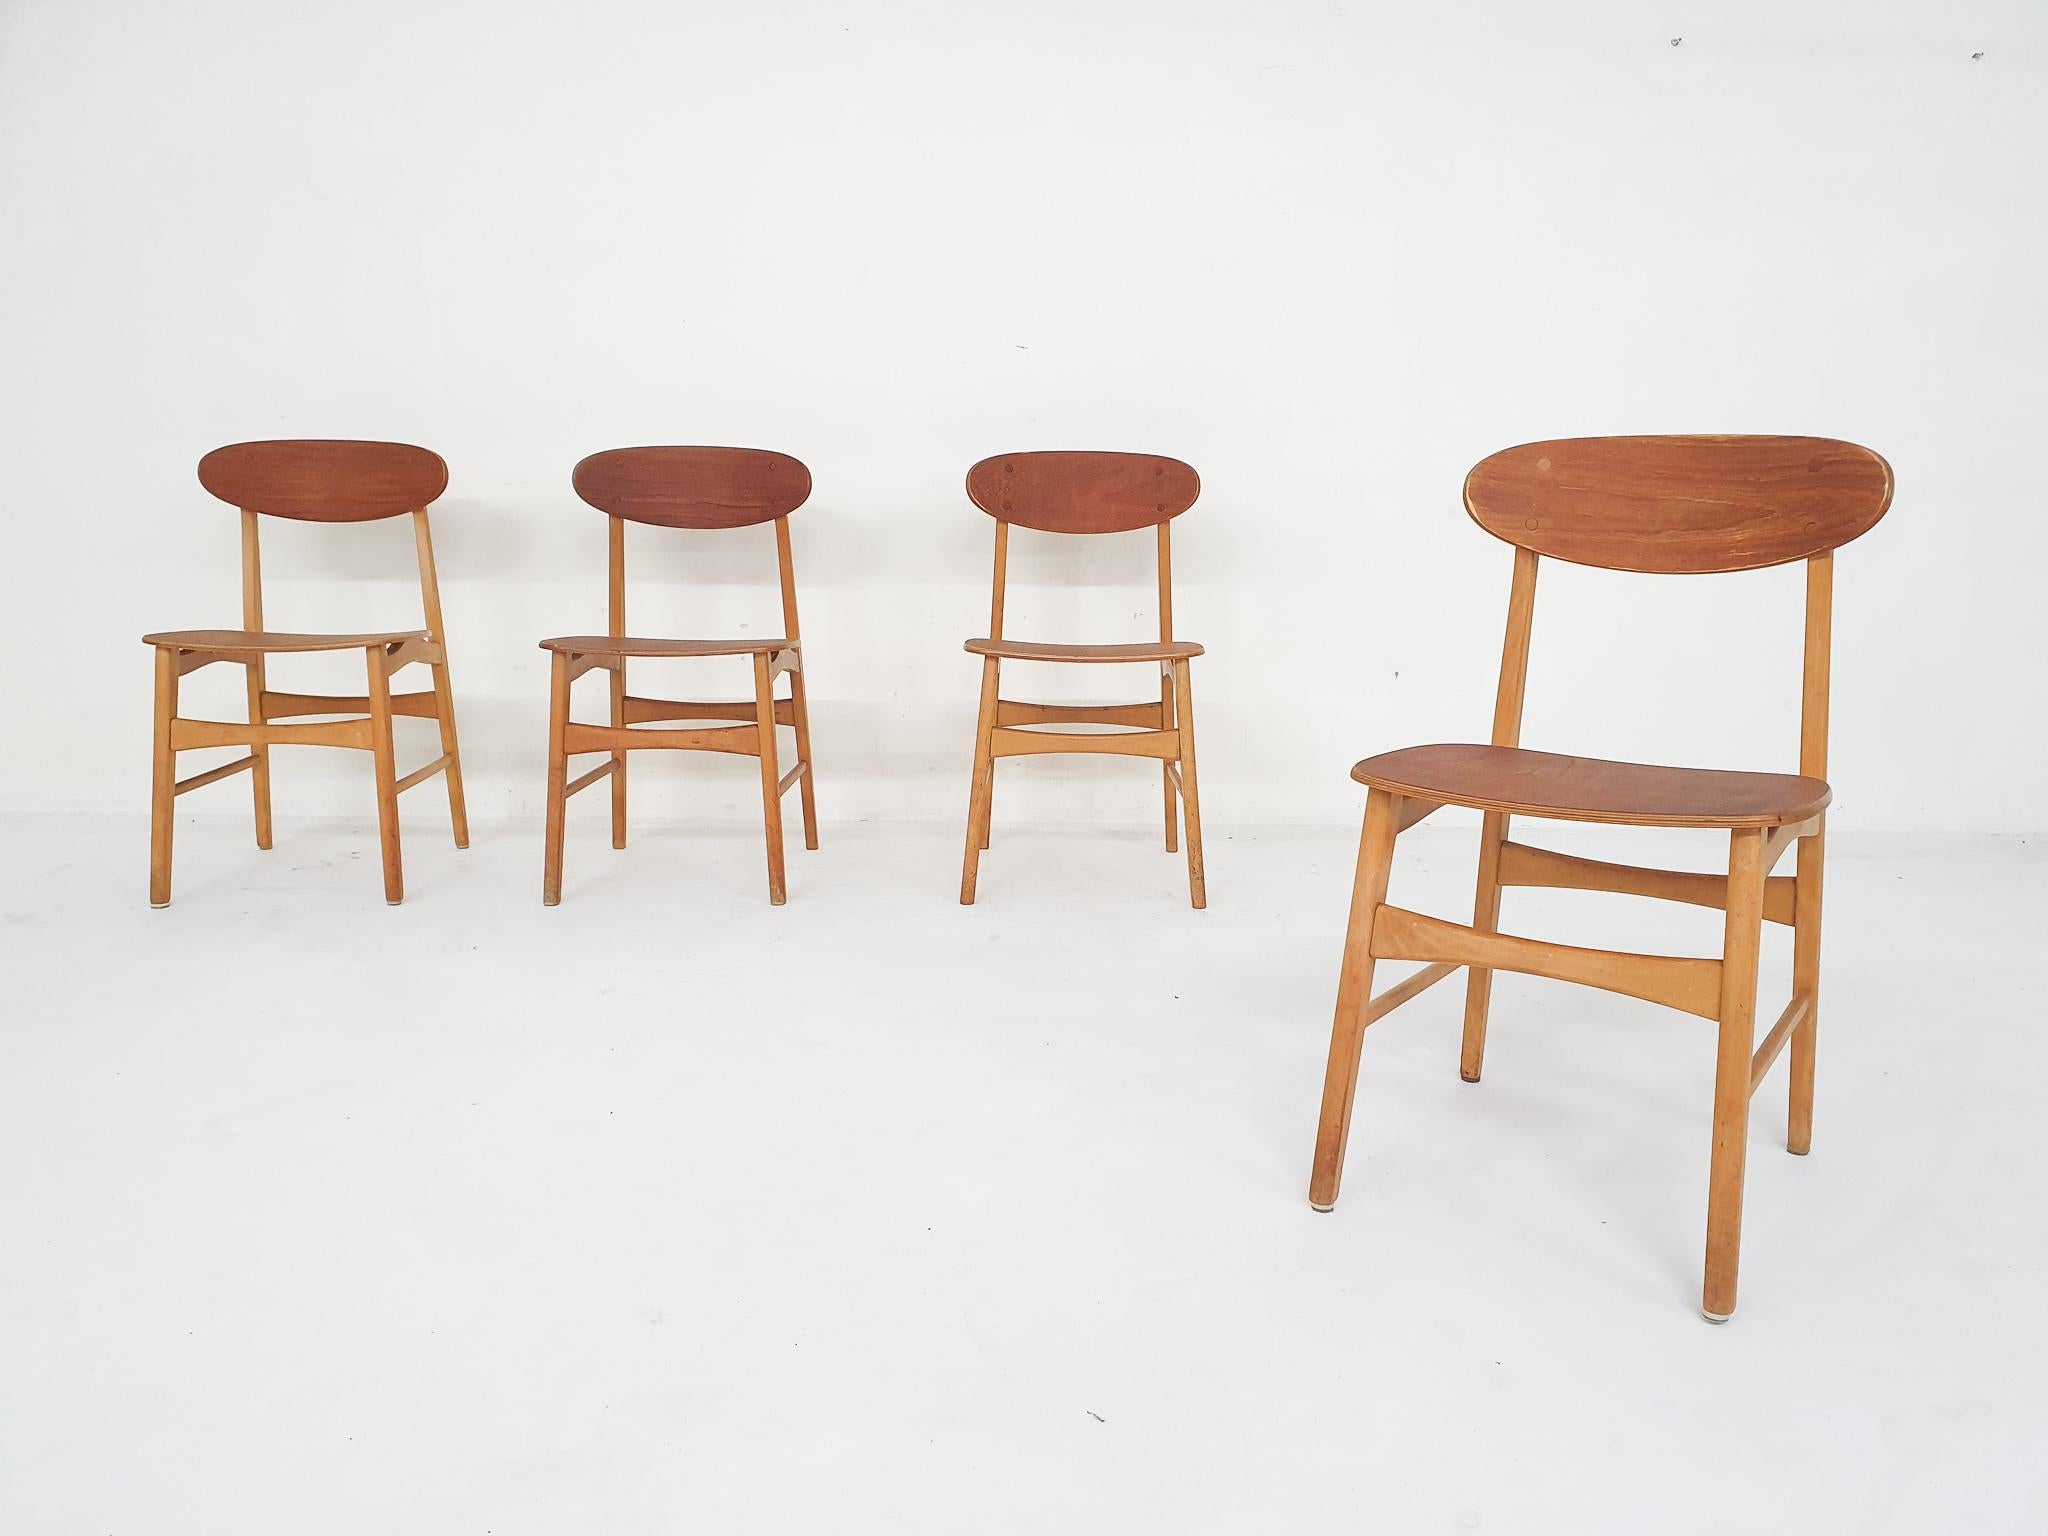 Four teak dining chairs in the style of Borge Mogensen or Pastoe.
We have refinished the seating and back and checked the joints and fixed them where needed.